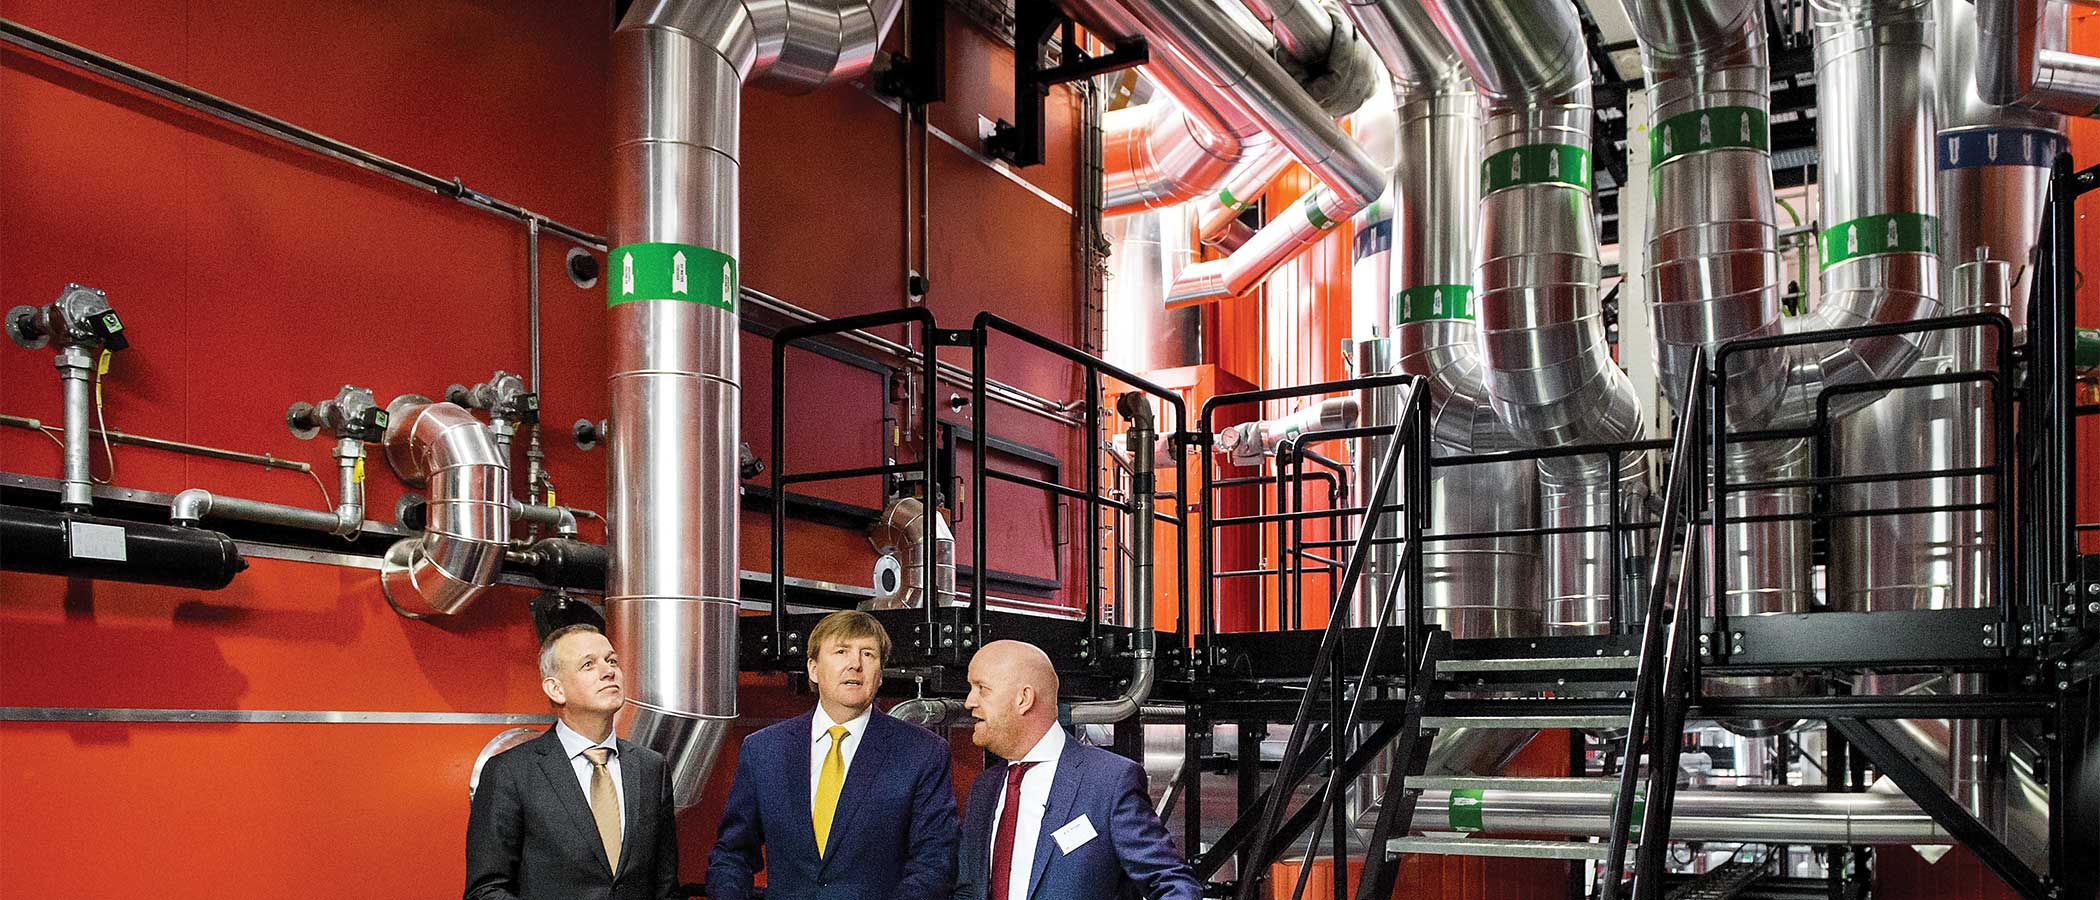 Dutch king Willem-Alexander attends the opening of BioWarmteCentrale (bioheating station) in Purmerend, the Netherlands.